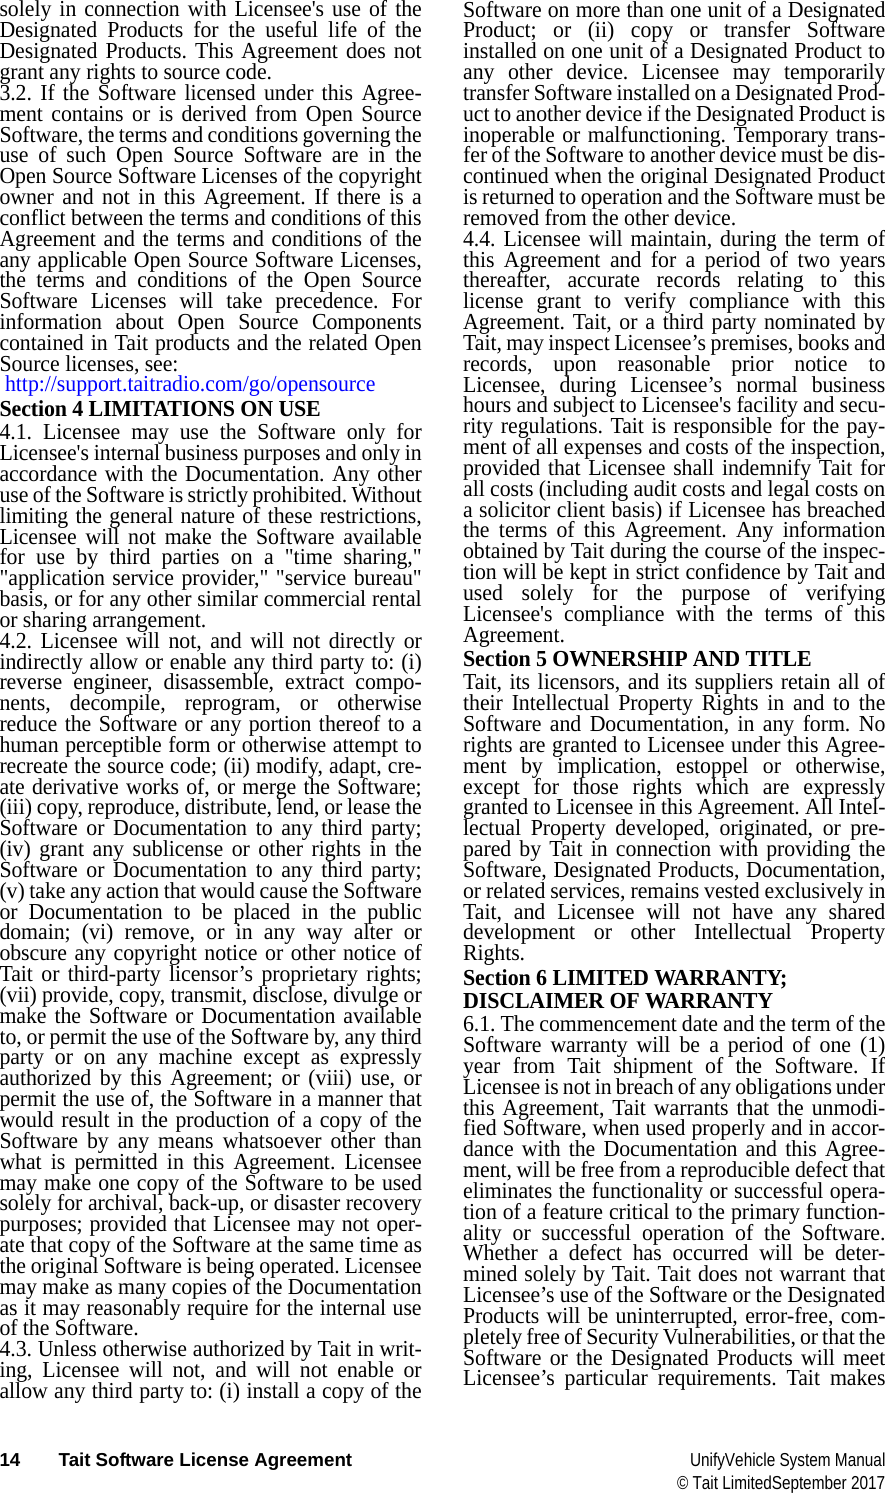  14 Tait Software License Agreement UnifyVehicle System Manual© Tait LimitedSeptember 2017solely in connection with Licensee&apos;s use of the Designated Products for the useful life of the Designated Products. This Agreement does not grant any rights to source code.3.2. If the Software licensed under this Agree-ment contains or is derived from Open Source Software, the terms and conditions governing the use of such Open Source Software are in the Open Source Software Licenses of the copyright owner and not in this Agreement. If there is a conflict between the terms and conditions of this Agreement and the terms and conditions of the any applicable Open Source Software Licenses, the terms and conditions of the Open Source Software Licenses will take precedence. For information about Open Source Components contained in Tait products and the related Open Source licenses, see:  http://support.taitradio.com/go/opensourceSection 4 LIMITATIONS ON USE4.1. Licensee may use the Software only for Licensee&apos;s internal business purposes and only in accordance with the Documentation. Any other use of the Software is strictly prohibited. Without limiting the general nature of these restrictions, Licensee will not make the Software available for use by third parties on a &quot;time sharing,&quot; &quot;application service provider,&quot; &quot;service bureau&quot; basis, or for any other similar commercial rental or sharing arrangement. 4.2. Licensee will not, and will not directly or indirectly allow or enable any third party to: (i) reverse engineer, disassemble, extract compo-nents, decompile, reprogram, or otherwise reduce the Software or any portion thereof to a human perceptible form or otherwise attempt to recreate the source code; (ii) modify, adapt, cre-ate derivative works of, or merge the Software; (iii) copy, reproduce, distribute, lend, or lease the Software or Documentation to any third party; (iv) grant any sublicense or other rights in the Software or Documentation to any third party; (v) take any action that would cause the Software or Documentation to be placed in the public domain; (vi) remove, or in any way alter or obscure any copyright notice or other notice of Tait or third-party licensor’s proprietary rights; (vii) provide, copy, transmit, disclose, divulge or make the Software or Documentation available to, or permit the use of the Software by, any third party or on any machine except as expressly authorized by this Agreement; or (viii) use, or permit the use of, the Software in a manner that would result in the production of a copy of the Software by any means whatsoever other than what is permitted in this Agreement. Licensee may make one copy of the Software to be used solely for archival, back-up, or disaster recovery purposes; provided that Licensee may not oper-ate that copy of the Software at the same time as the original Software is being operated. Licensee may make as many copies of the Documentation as it may reasonably require for the internal use of the Software.4.3. Unless otherwise authorized by Tait in writ-ing, Licensee will not, and will not enable or allow any third party to: (i) install a copy of the Software on more than one unit of a Designated Product; or (ii) copy or transfer Software installed on one unit of a Designated Product to any other device. Licensee may temporarily transfer Software installed on a Designated Prod-uct to another device if the Designated Product is inoperable or malfunctioning. Temporary trans-fer of the Software to another device must be dis-continued when the original Designated Product is returned to operation and the Software must be removed from the other device. 4.4. Licensee will maintain, during the term of this Agreement and for a period of two years thereafter, accurate records relating to this license grant to verify compliance with this Agreement. Tait, or a third party nominated by Tait, may inspect Licensee’s premises, books and records, upon reasonable prior notice to Licensee, during Licensee’s normal business hours and subject to Licensee&apos;s facility and secu-rity regulations. Tait is responsible for the pay-ment of all expenses and costs of the inspection, provided that Licensee shall indemnify Tait for all costs (including audit costs and legal costs on a solicitor client basis) if Licensee has breached the terms of this Agreement. Any information obtained by Tait during the course of the inspec-tion will be kept in strict confidence by Tait and used solely for the purpose of verifying Licensee&apos;s compliance with the terms of this Agreement.Section 5 OWNERSHIP AND TITLETait, its licensors, and its suppliers retain all of their Intellectual Property Rights in and to the Software and Documentation, in any form. No rights are granted to Licensee under this Agree-ment by implication, estoppel or otherwise, except for those rights which are expressly granted to Licensee in this Agreement. All Intel-lectual Property developed, originated, or pre-pared by Tait in connection with providing the Software, Designated Products, Documentation, or related services, remains vested exclusively in Tait, and Licensee will not have any shared development or other Intellectual Property Rights.Section 6 LIMITED WARRANTY; DISCLAIMER OF WARRANTY 6.1. The commencement date and the term of the Software warranty will be a period of one (1) year from Tait shipment of the Software. If Licensee is not in breach of any obligations under this Agreement, Tait warrants that the unmodi-fied Software, when used properly and in accor-dance with the Documentation and this Agree-ment, will be free from a reproducible defect that eliminates the functionality or successful opera-tion of a feature critical to the primary function-ality or successful operation of the Software. Whether a defect has occurred will be deter-mined solely by Tait. Tait does not warrant that Licensee’s use of the Software or the Designated Products will be uninterrupted, error-free, com-pletely free of Security Vulnerabilities, or that the Software or the Designated Products will meet Licensee’s particular requirements. Tait makes 